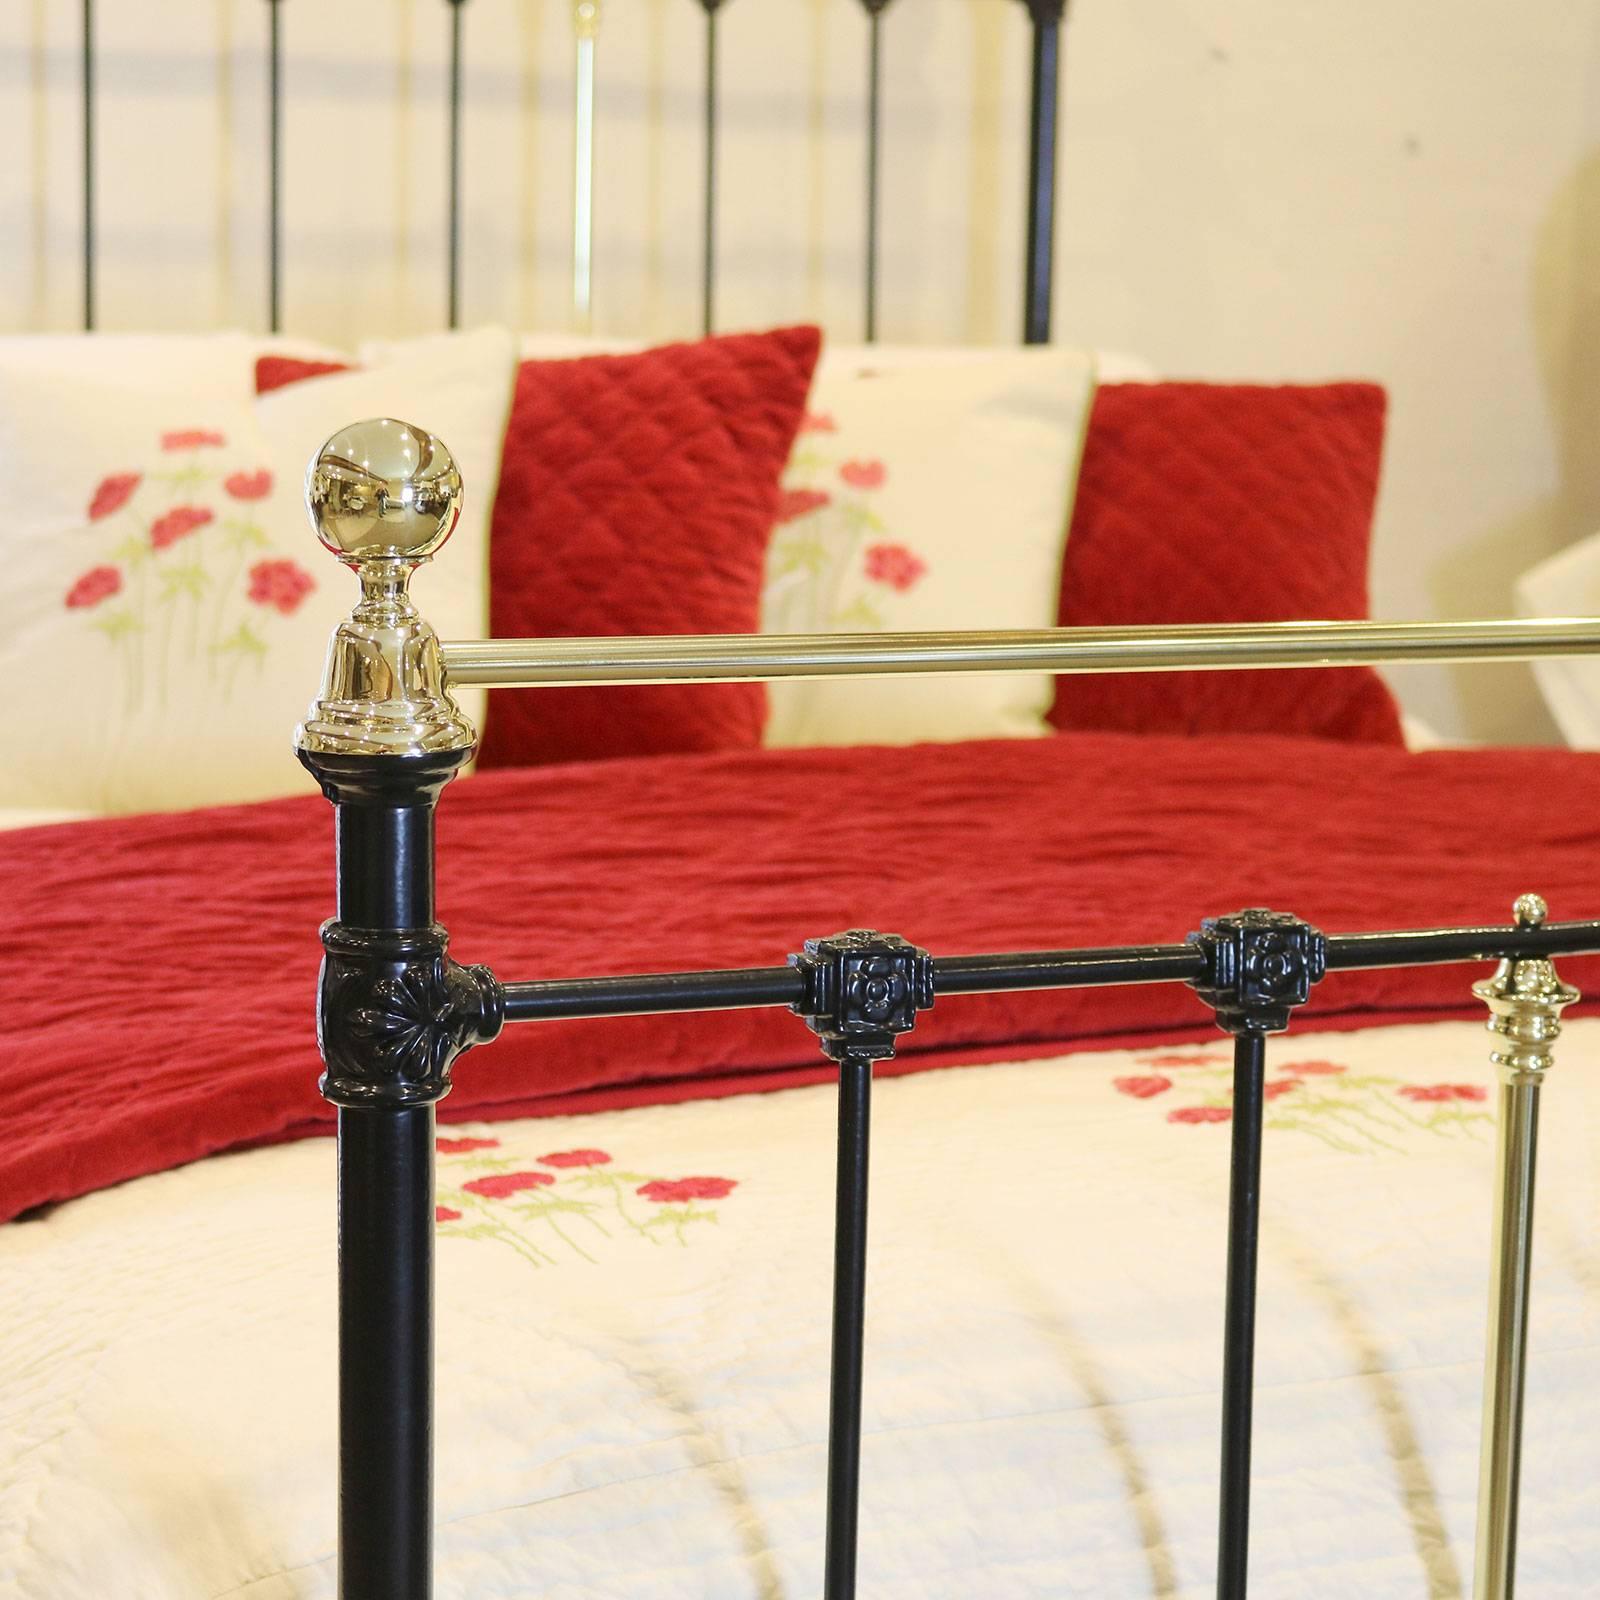 Victorian Brass and Iron Bed in Black, MK89